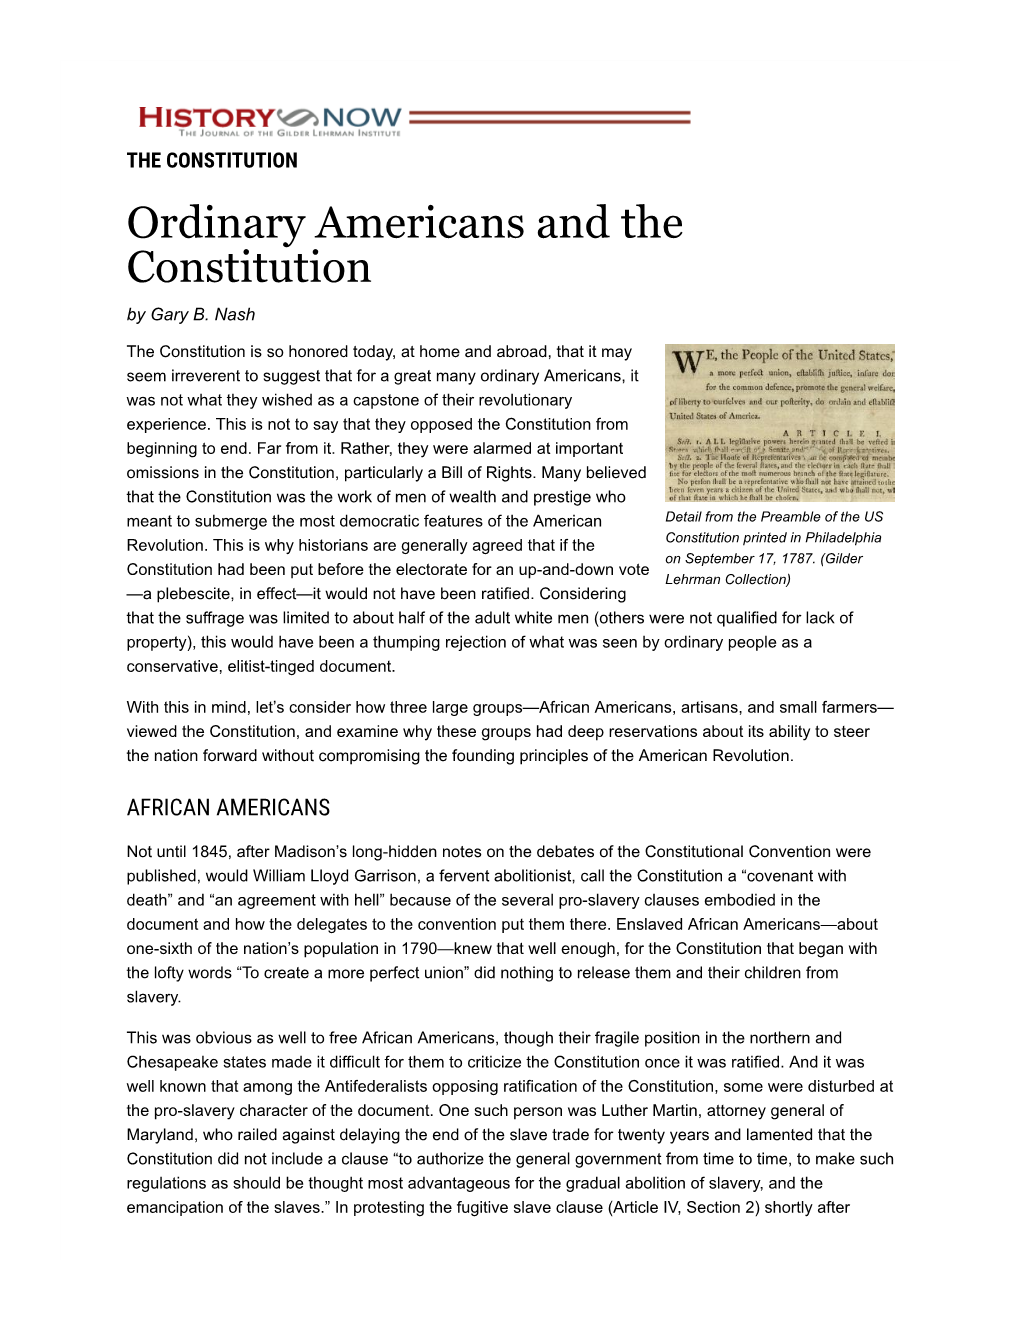 Ordinary Americans and the Constitution by Gary B